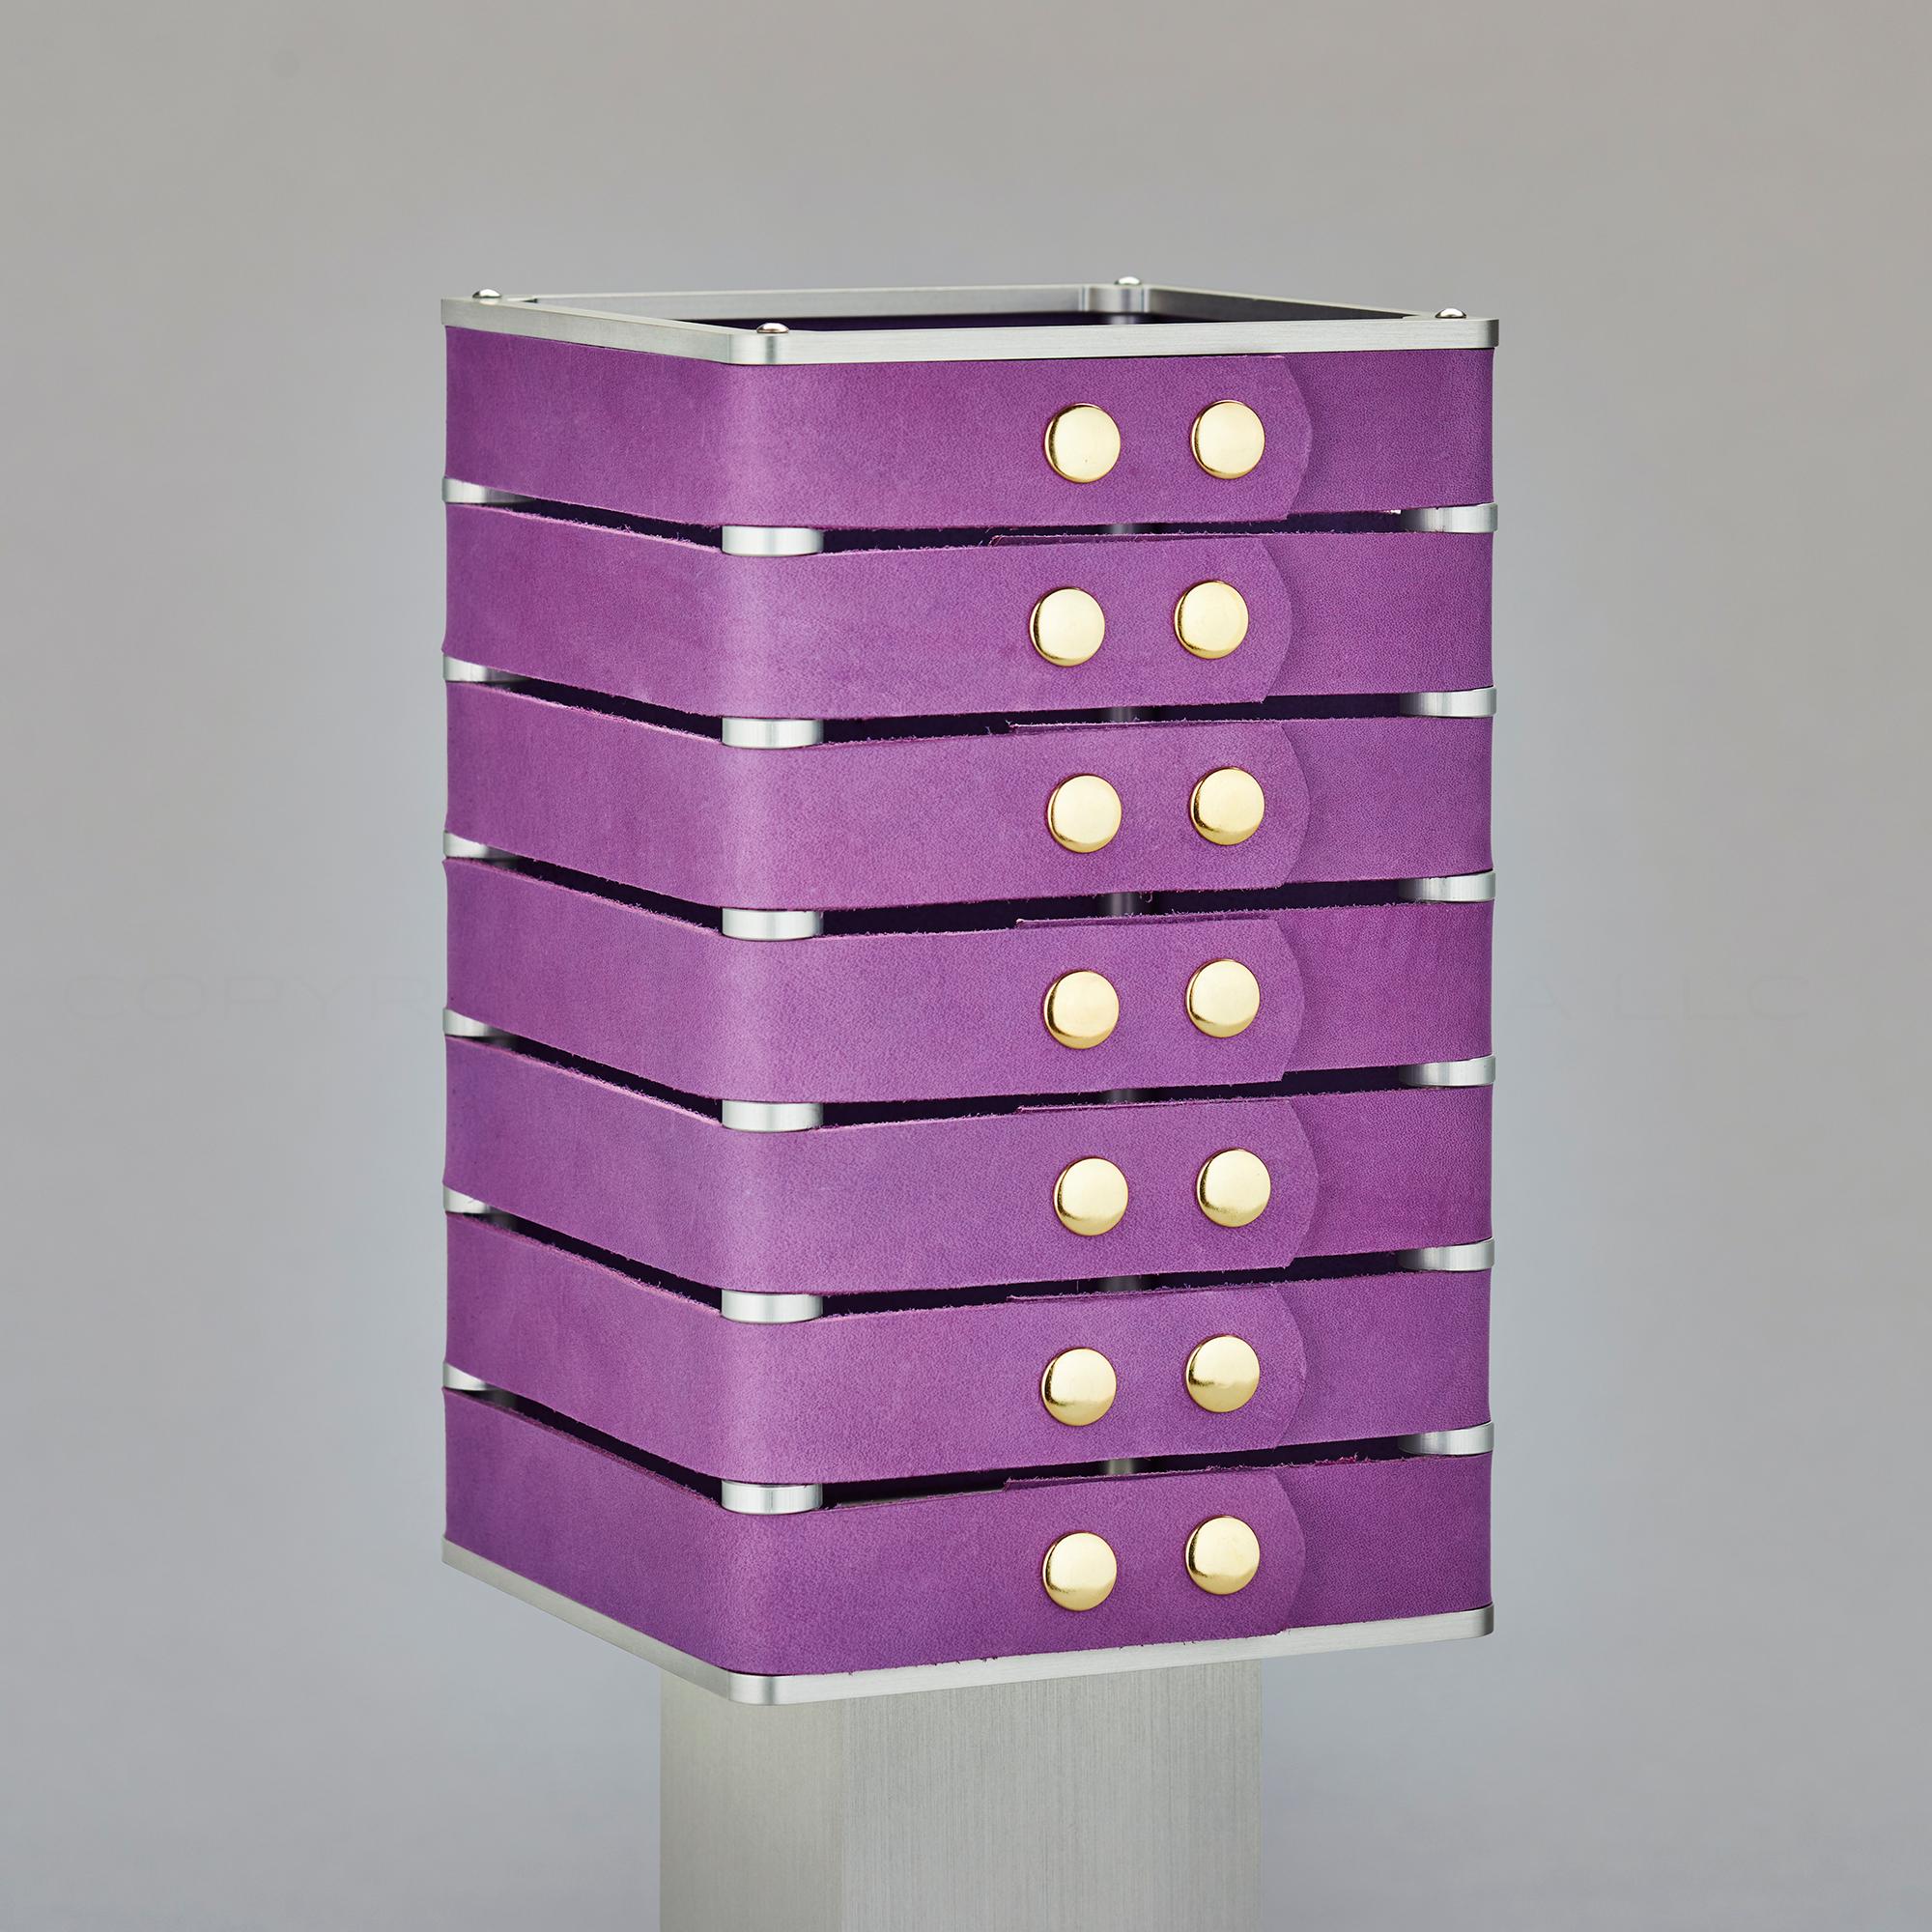 Contemporary Modern, Minimal, Solid Metal Table Light in Violet Purple Italian Leather